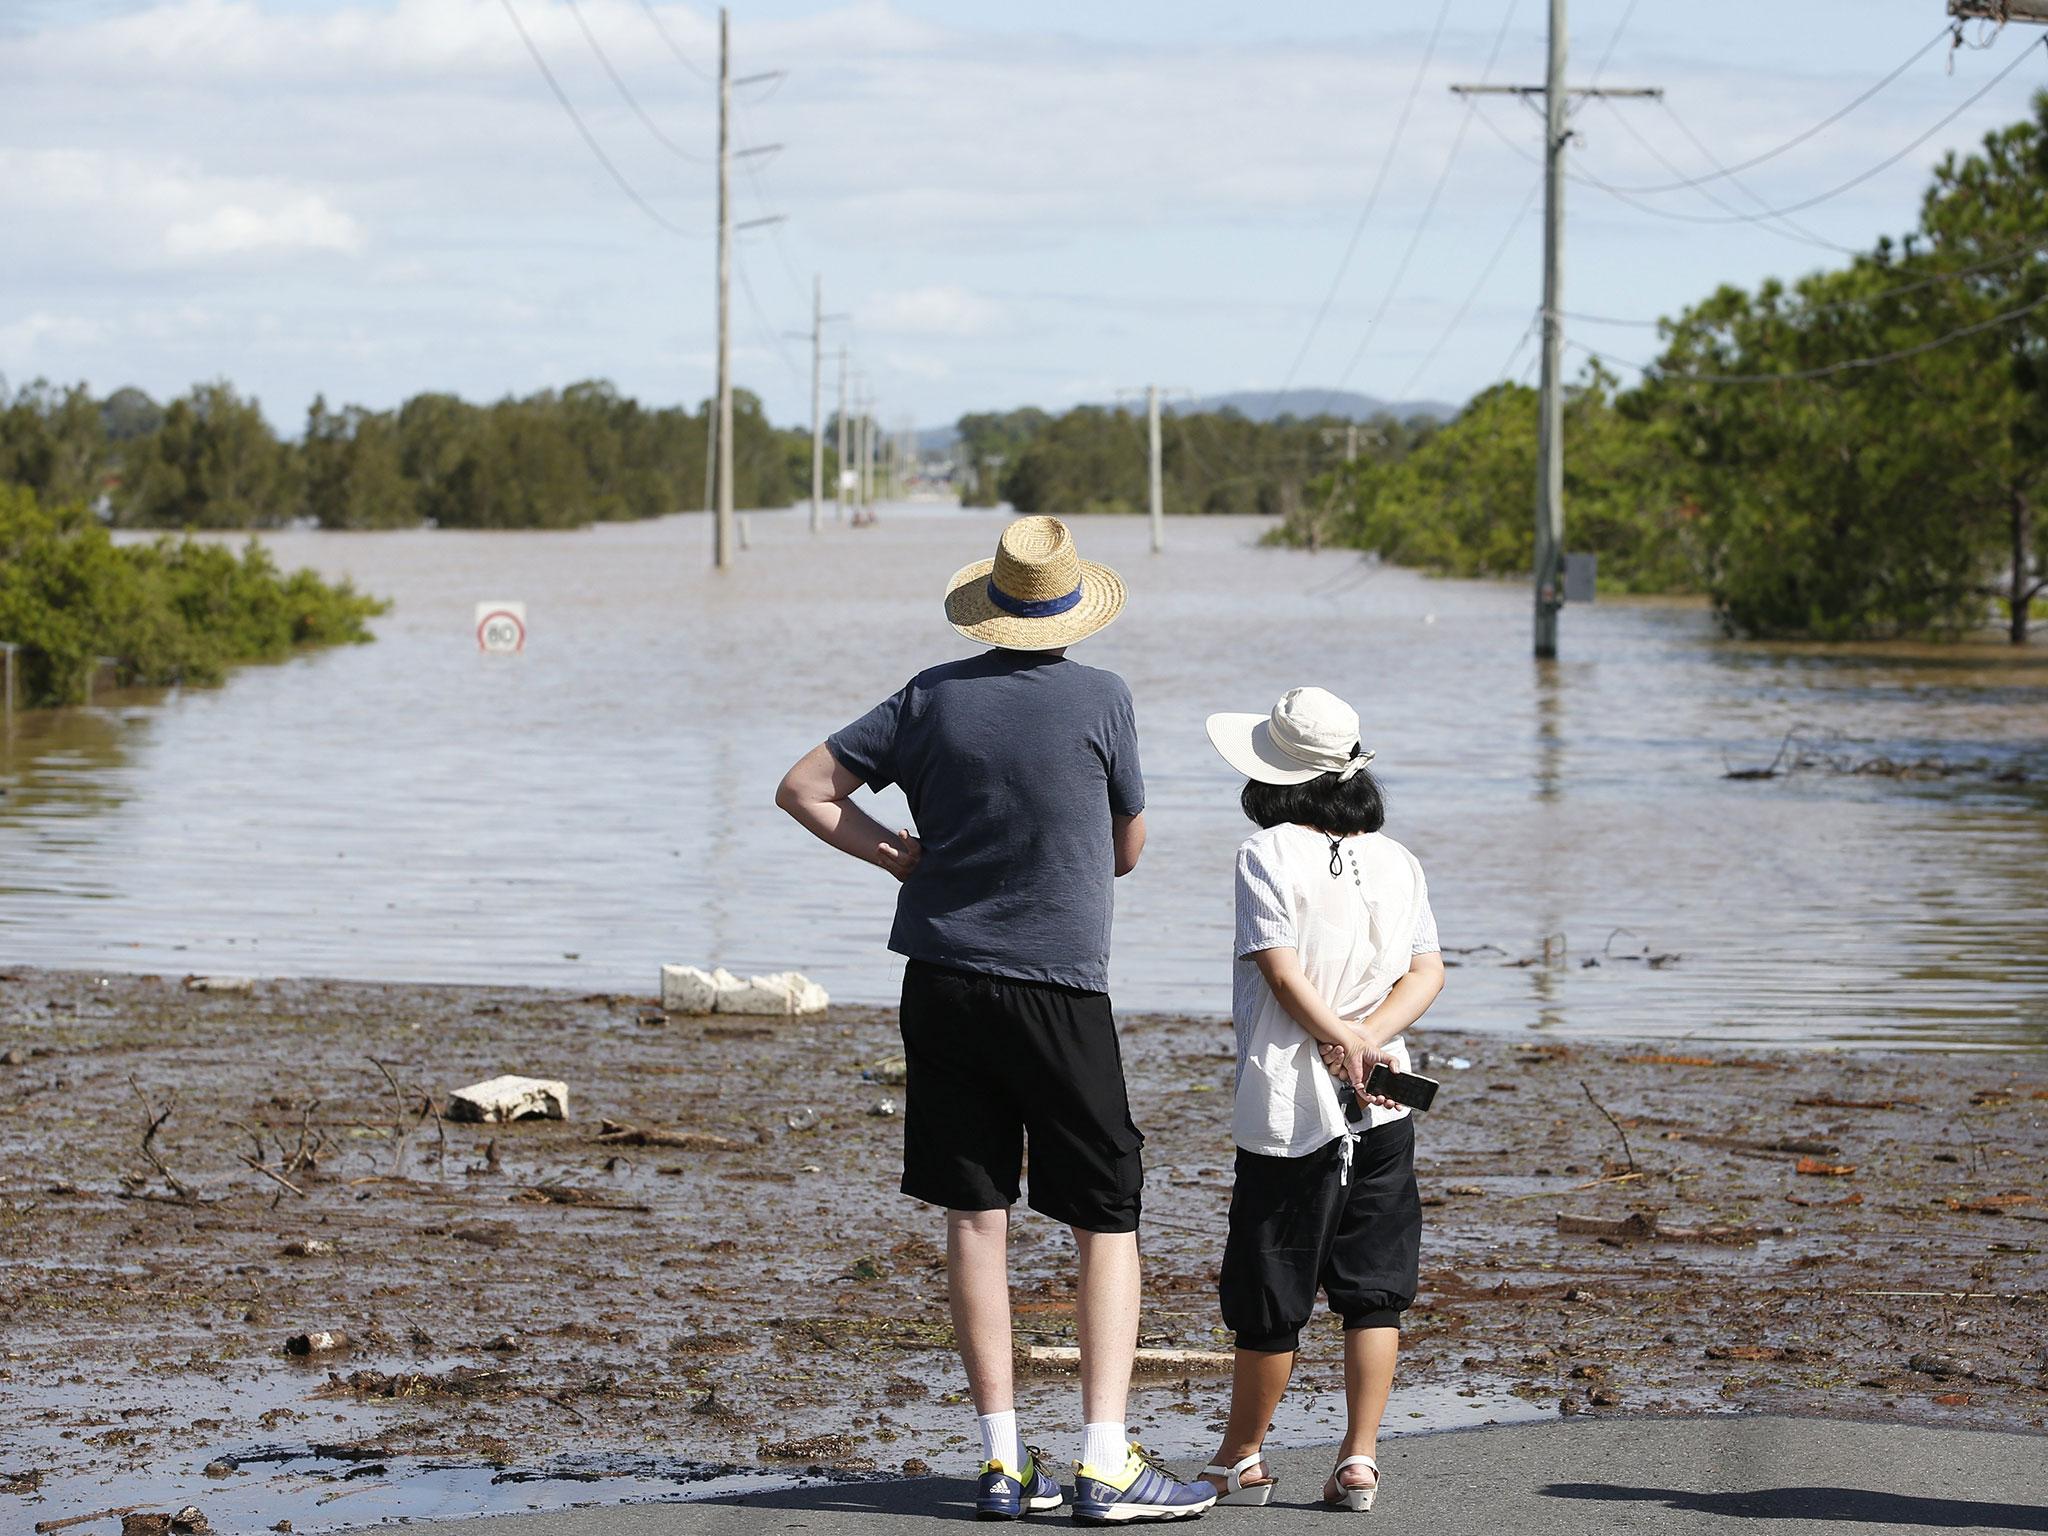 A severe rain depression is currently taking place throughout south-east Queensland on the back of ex-Tropical Cyclone Debbie, causing floods in the areas